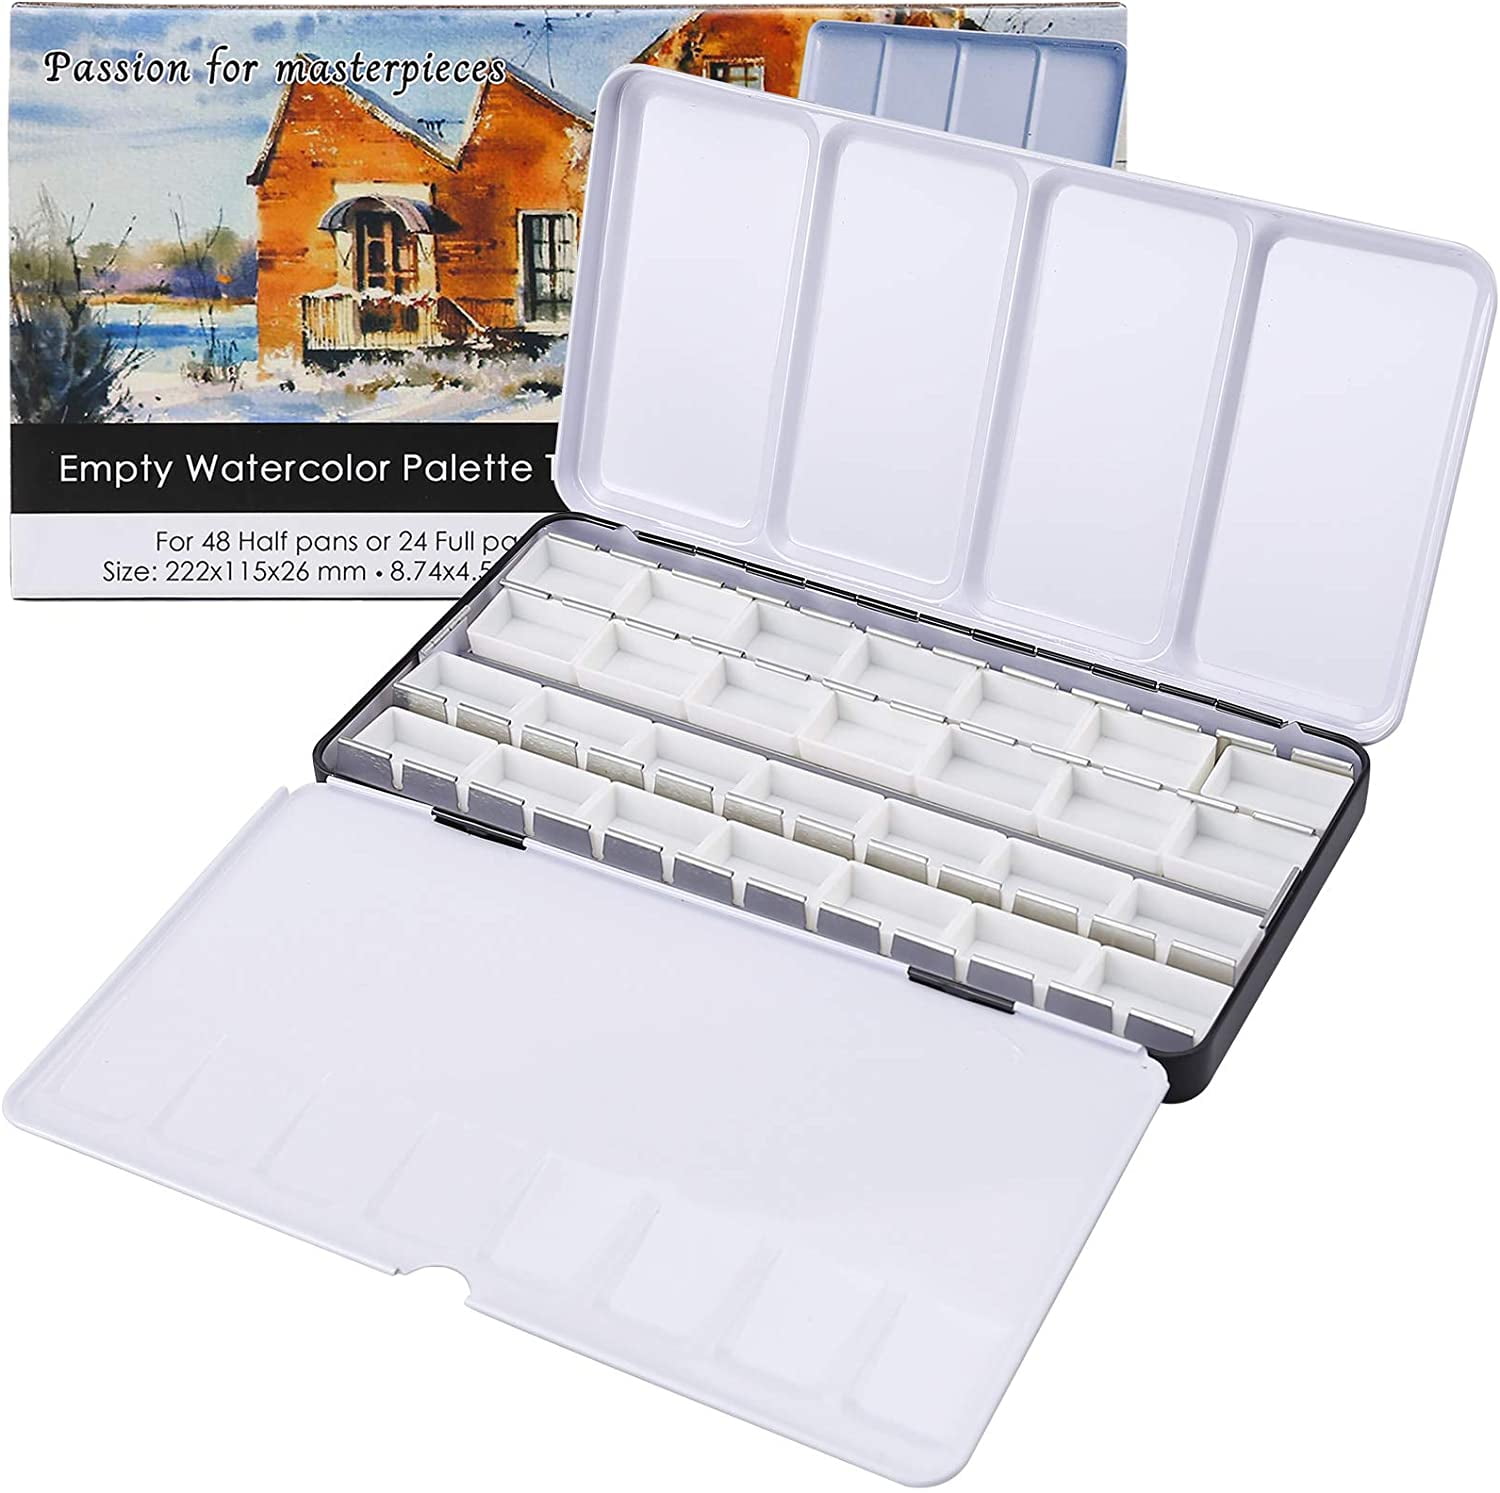 Model T03 Travel Empty Watercolor Tins Palette - Medium Watercolor Palette  Paint Case for Holding 36 Half Pans or 21 Full Pans – FCLUB Art Supply